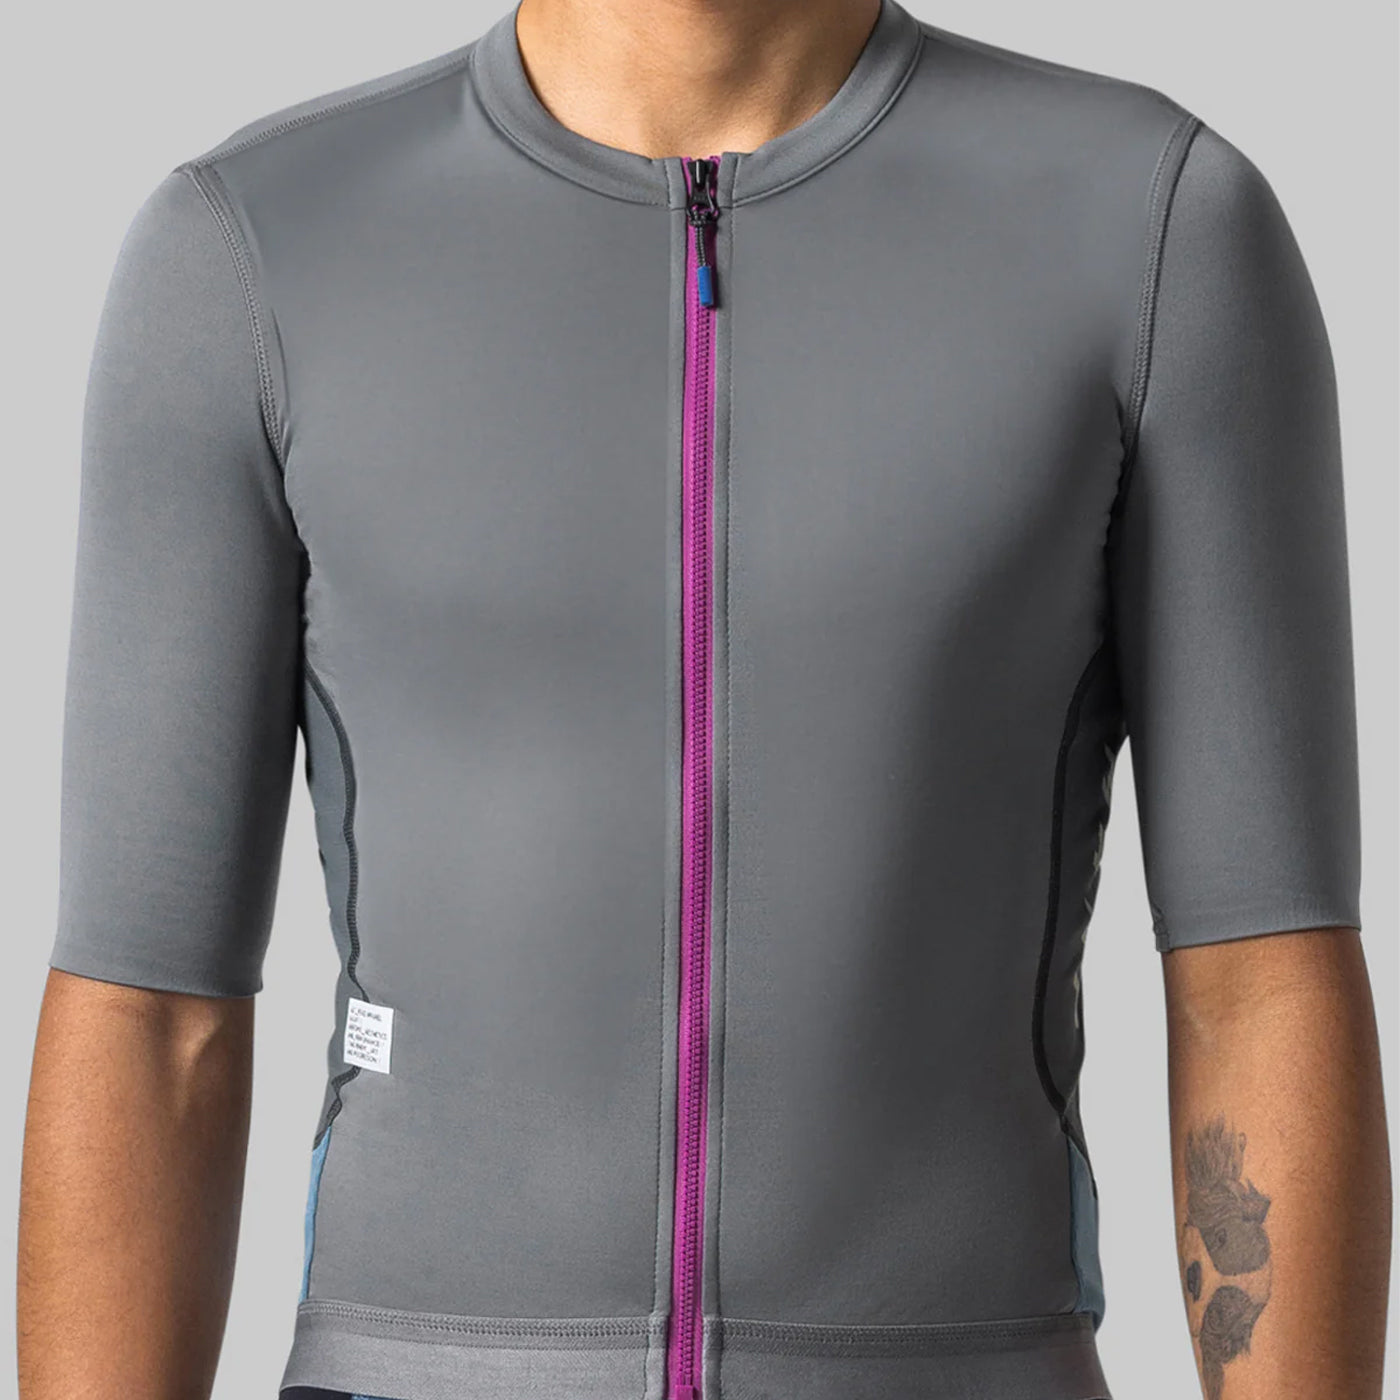 Maap Alt_Road jersey - Grey | All4cycling